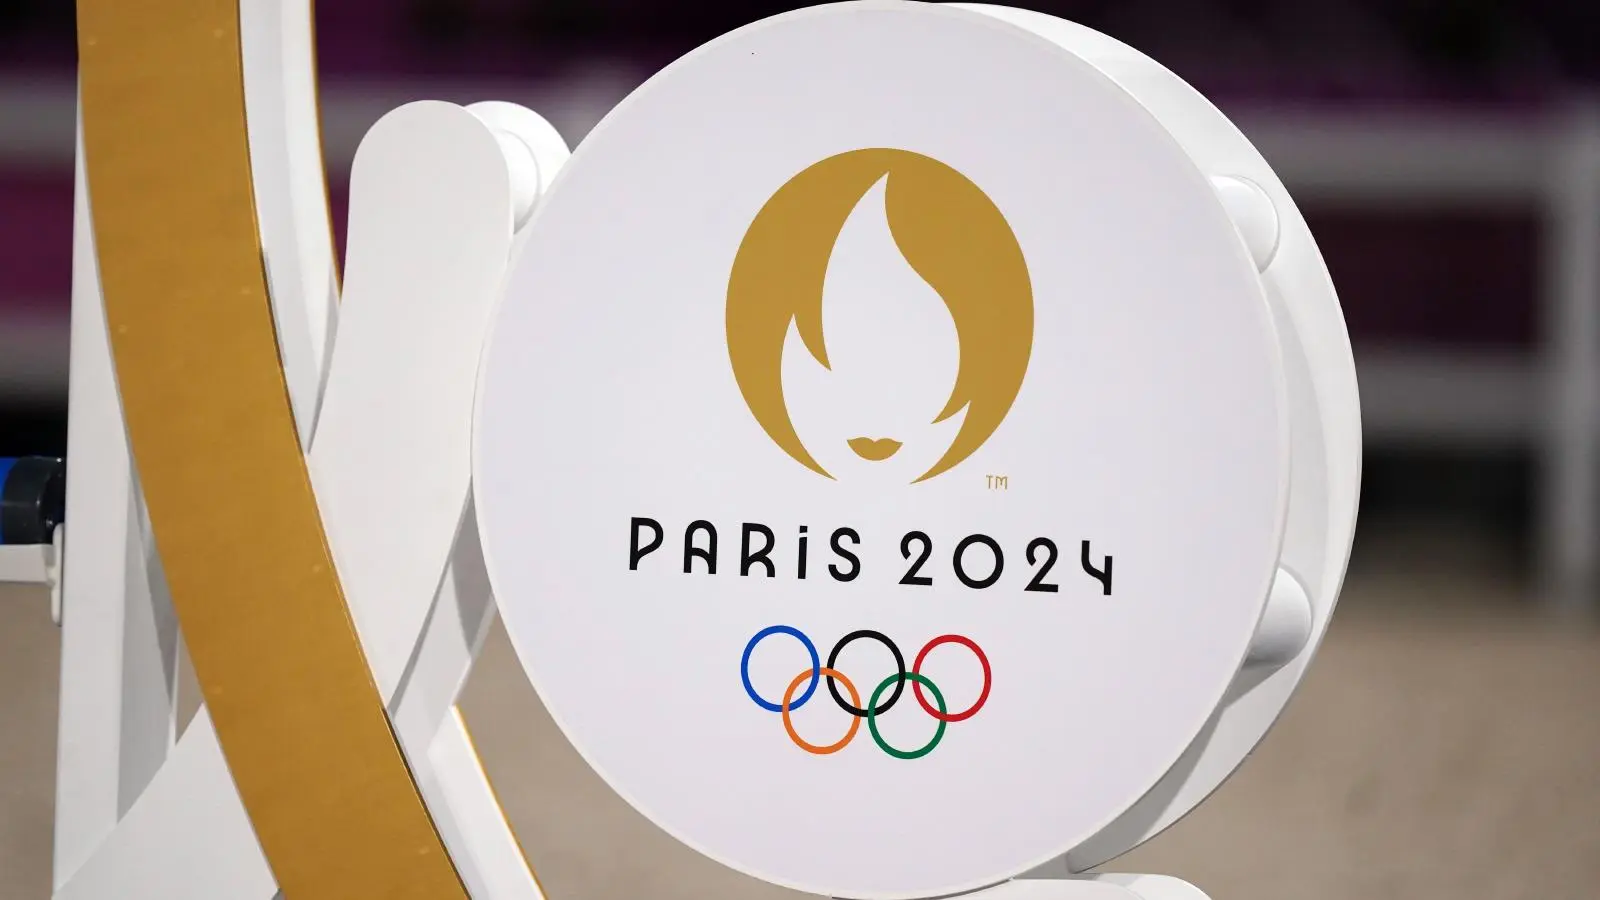 Embracing Change and Unity The 2024 Olympic Games in Paris Olympic